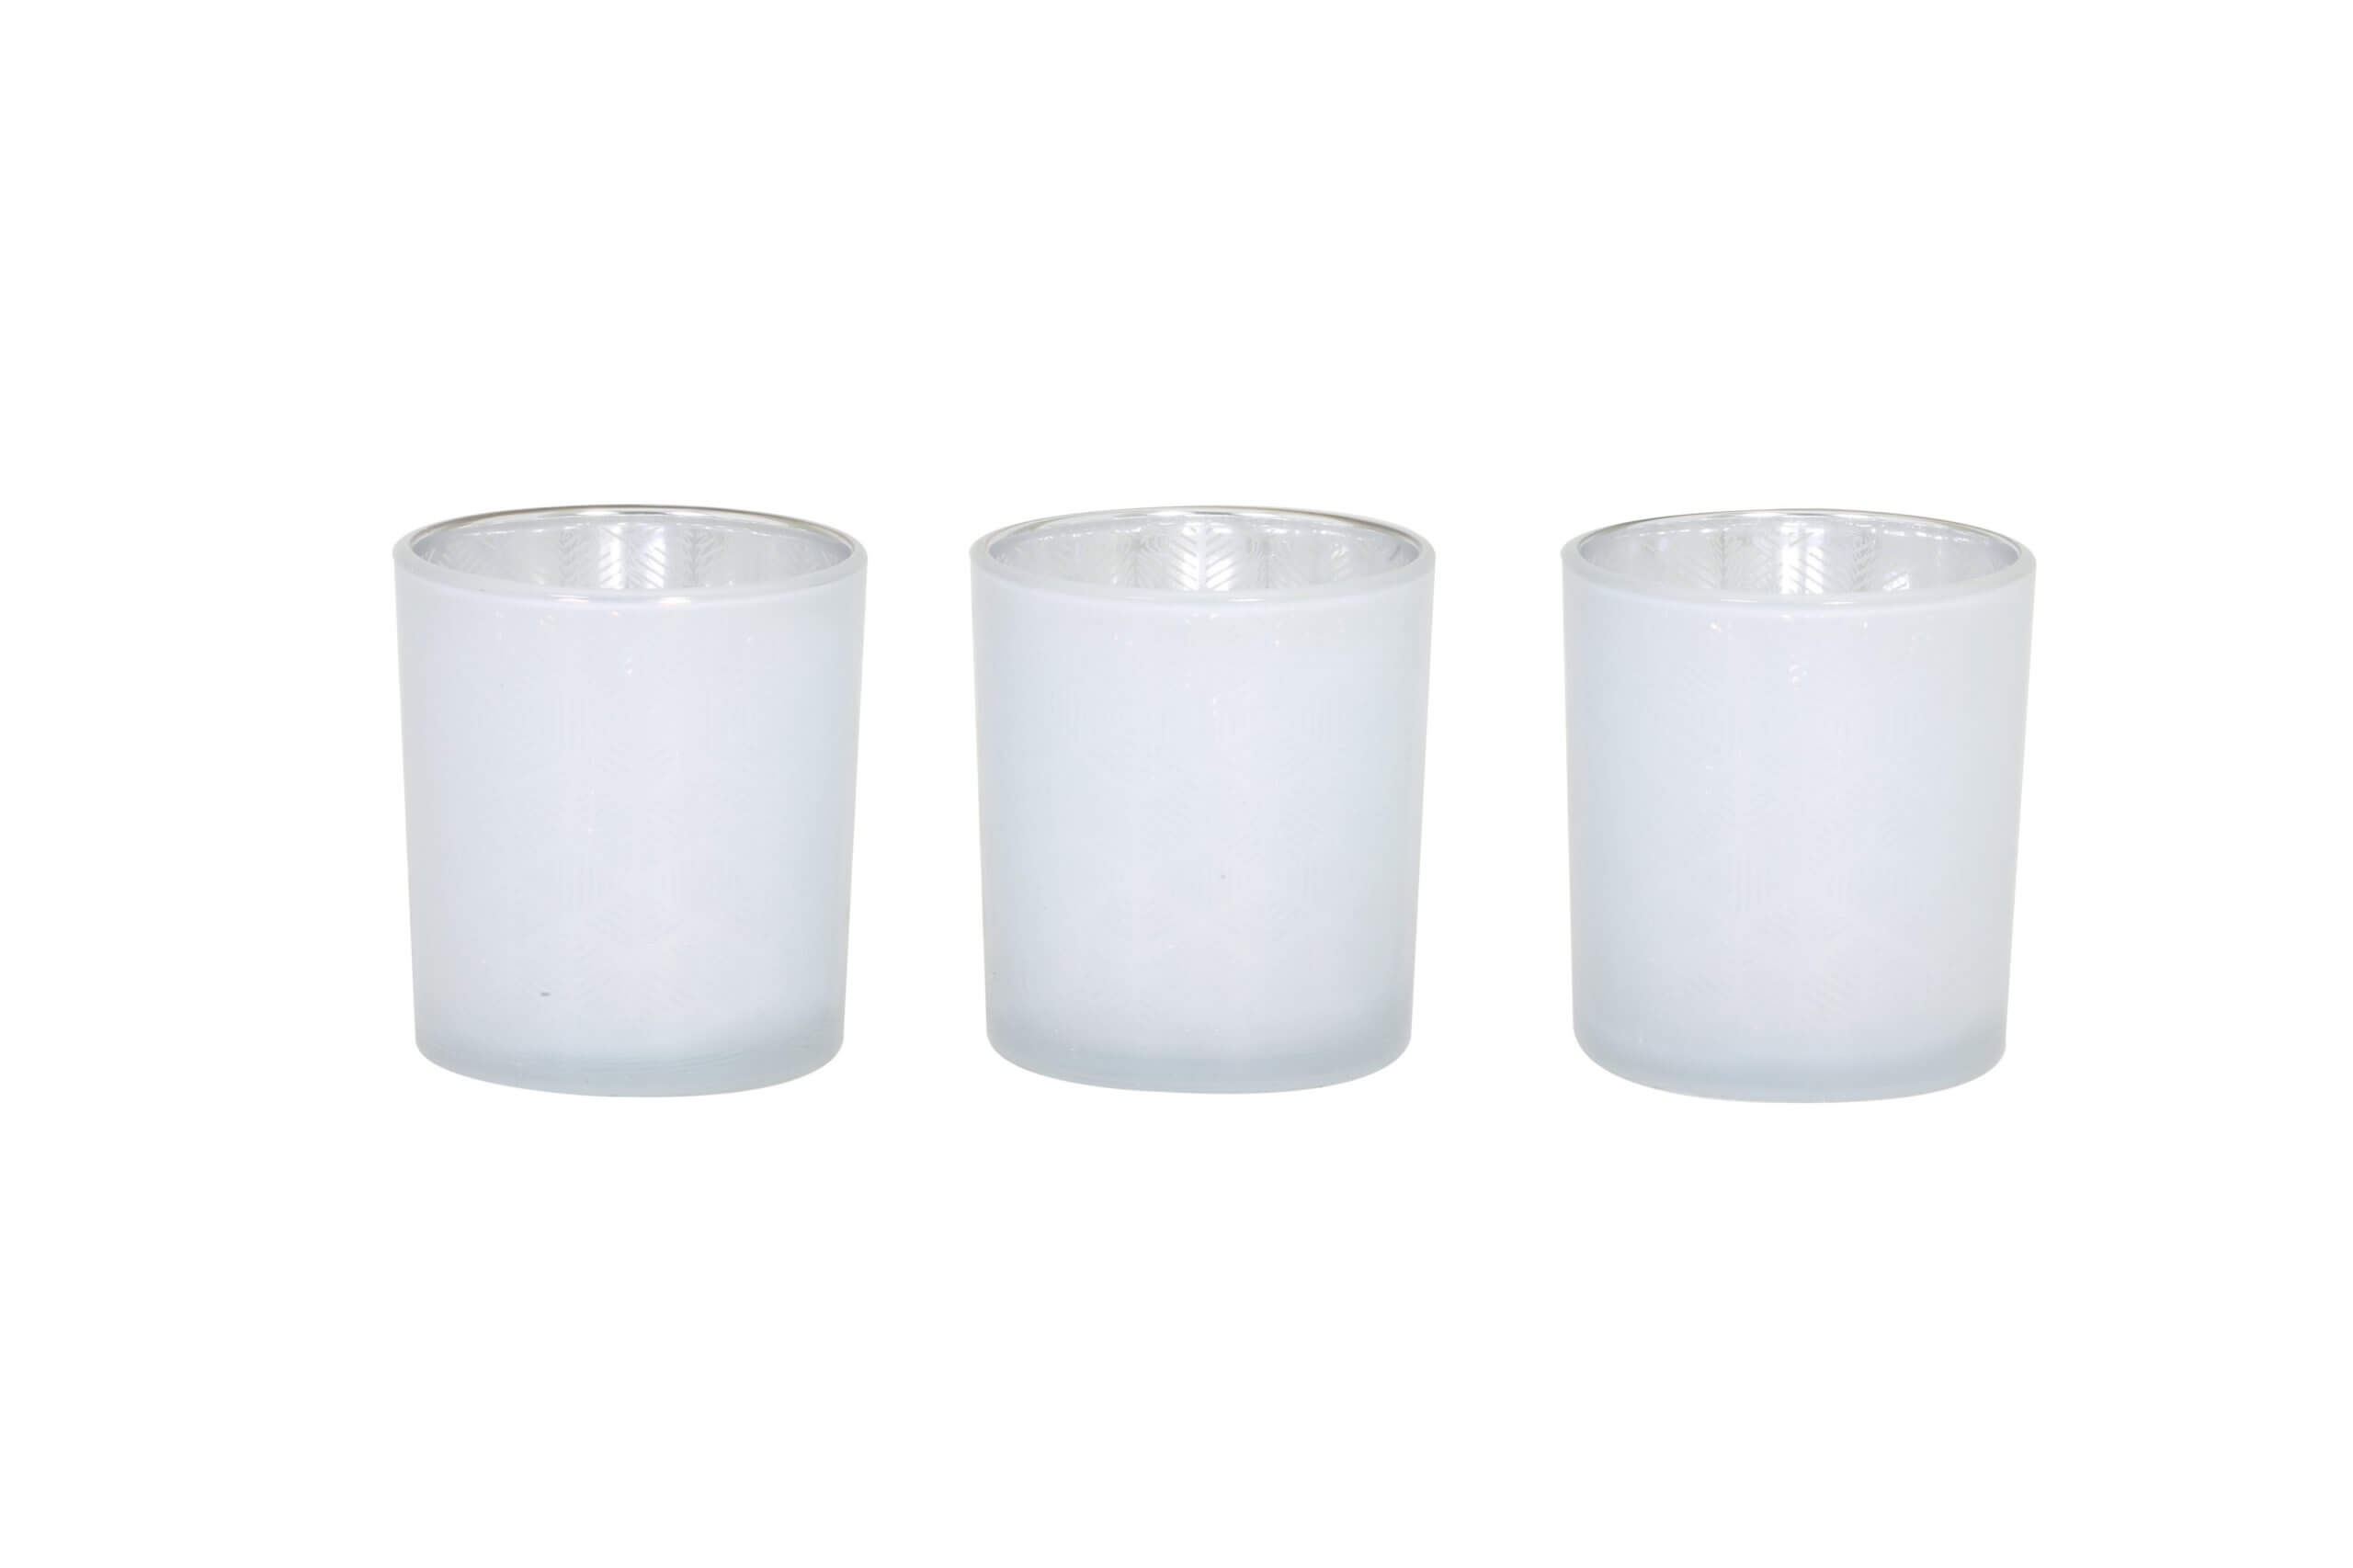 Trio of white and silver tealight votives